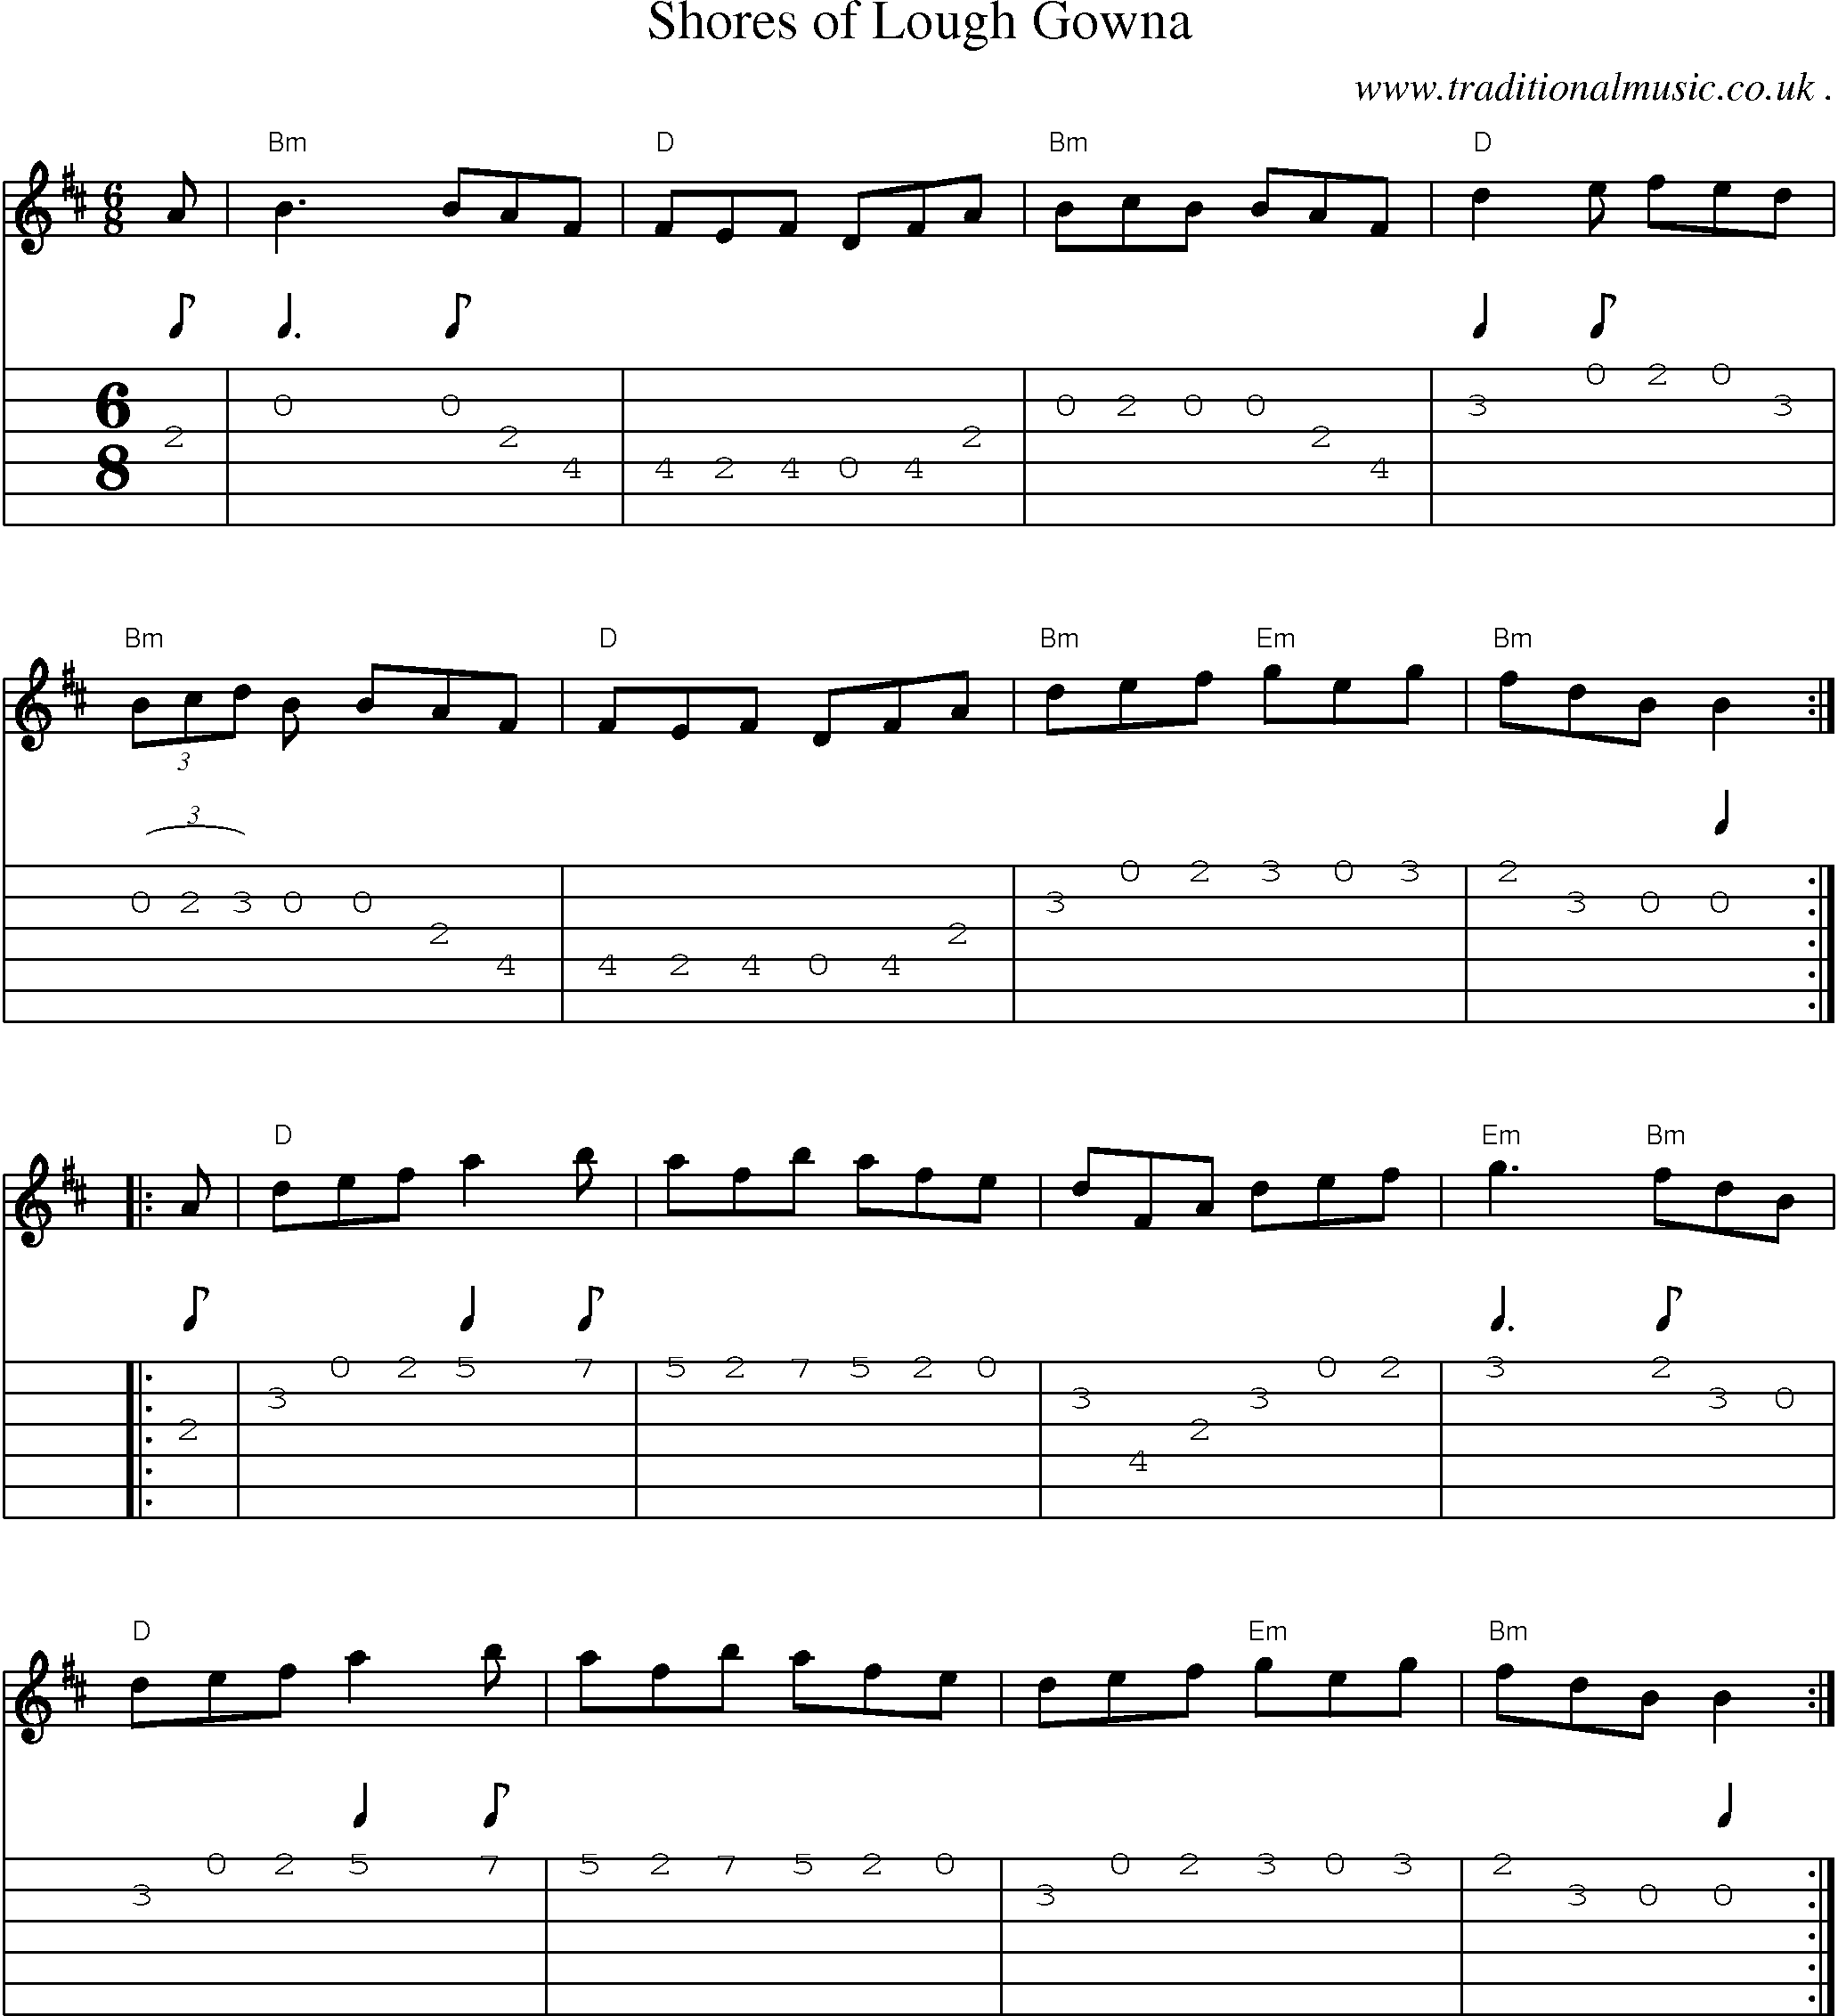 Music Score and Guitar Tabs for Shores Of Lough Gowna